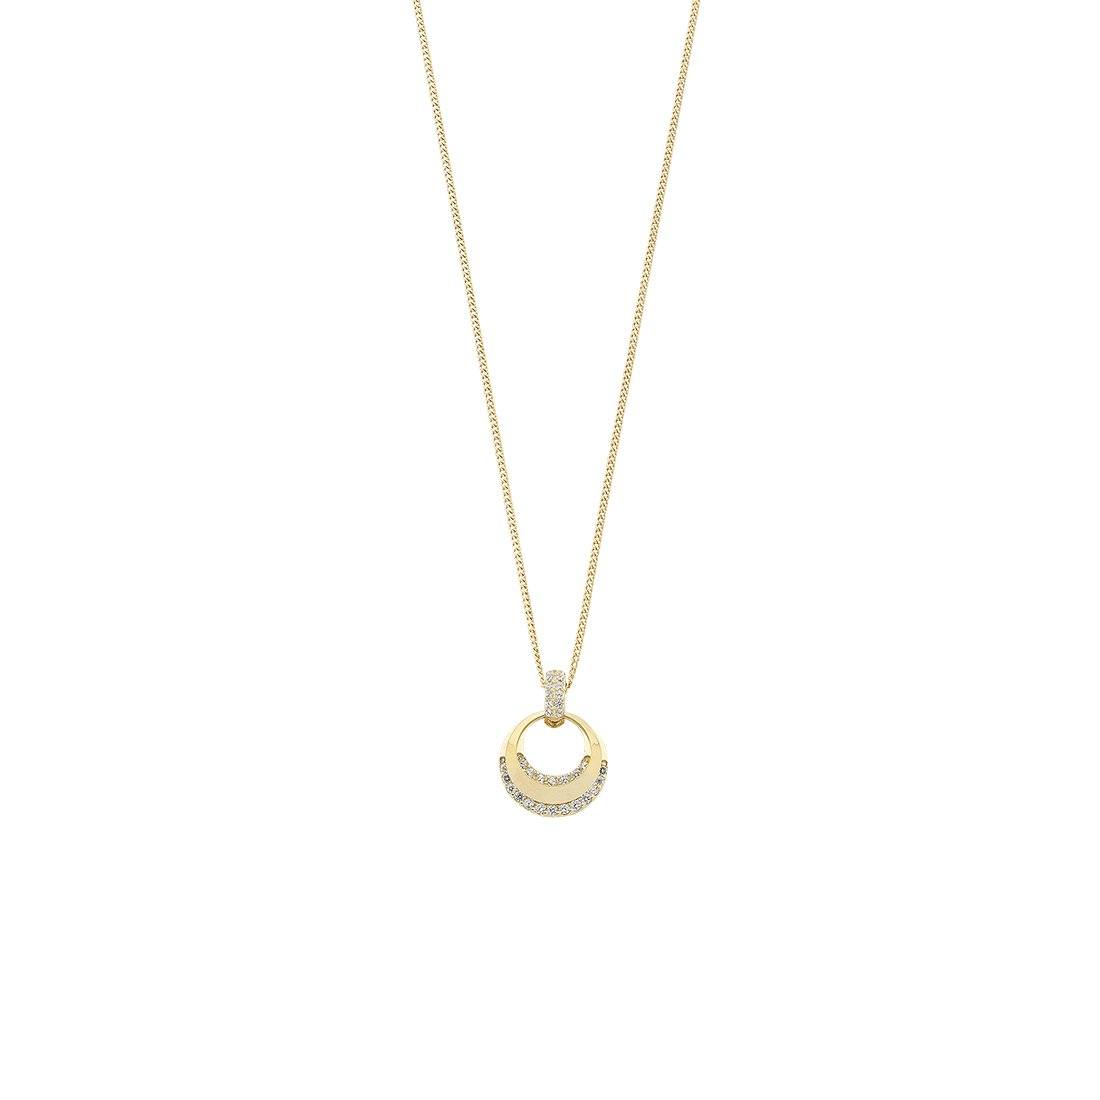 9ct Gold Pendant With Silver Infused Chain Necklaces Bevilles 